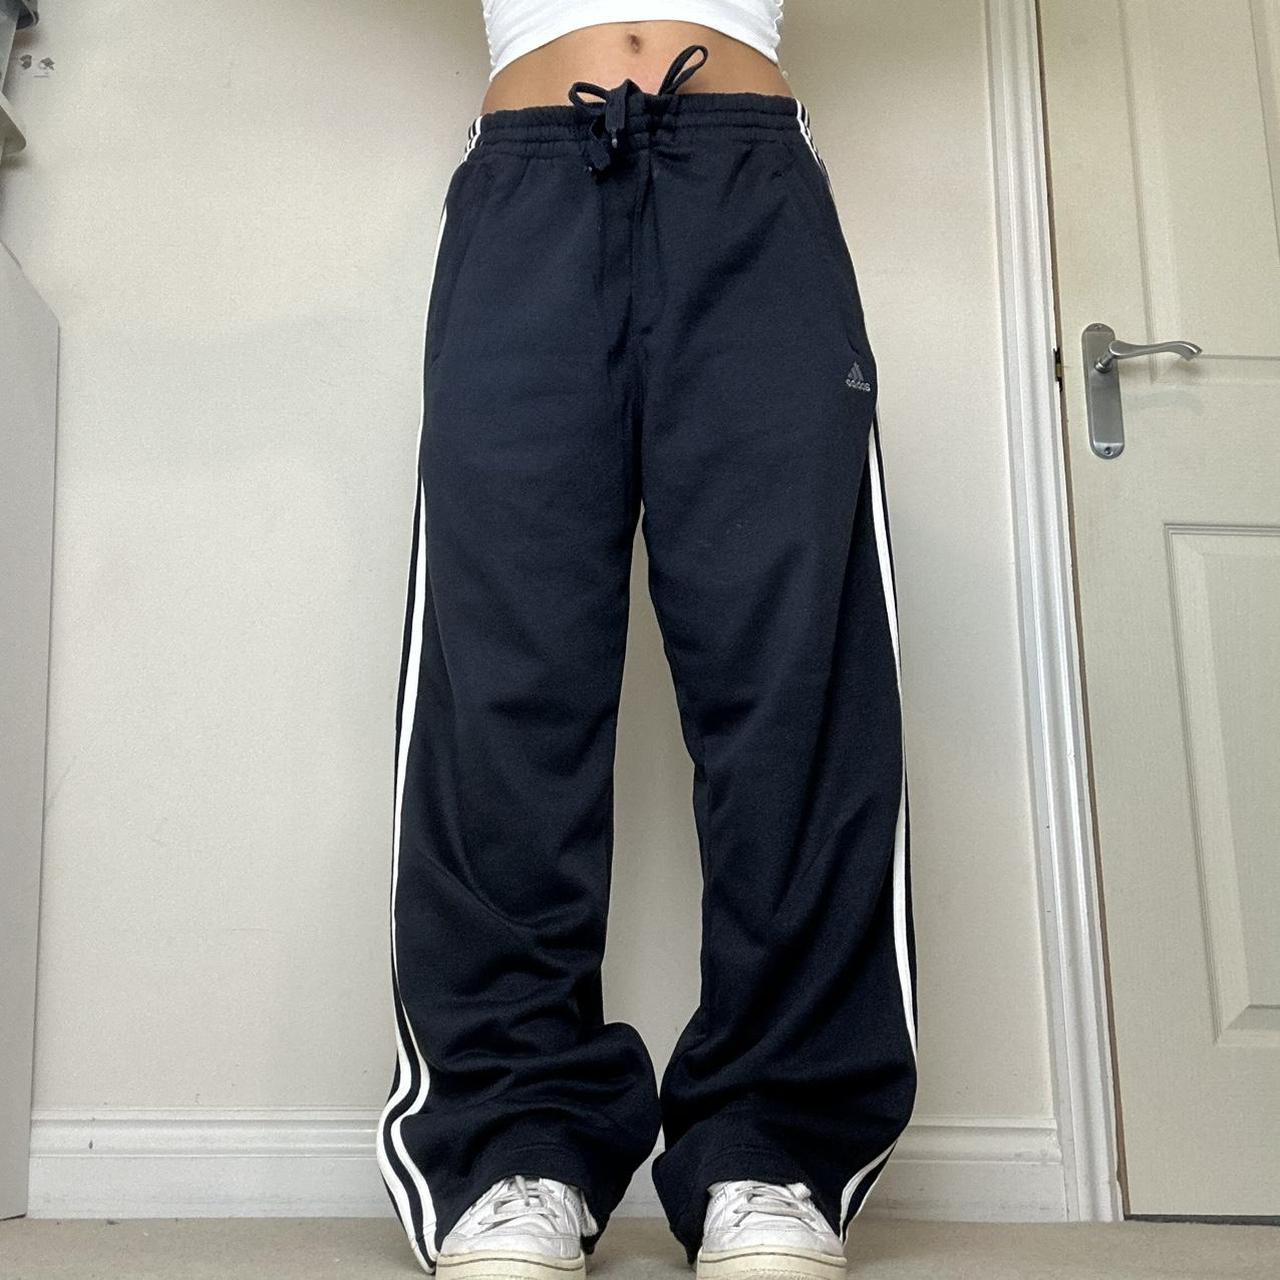 Adidas Women's Navy and Blue Joggers-tracksuits | Depop